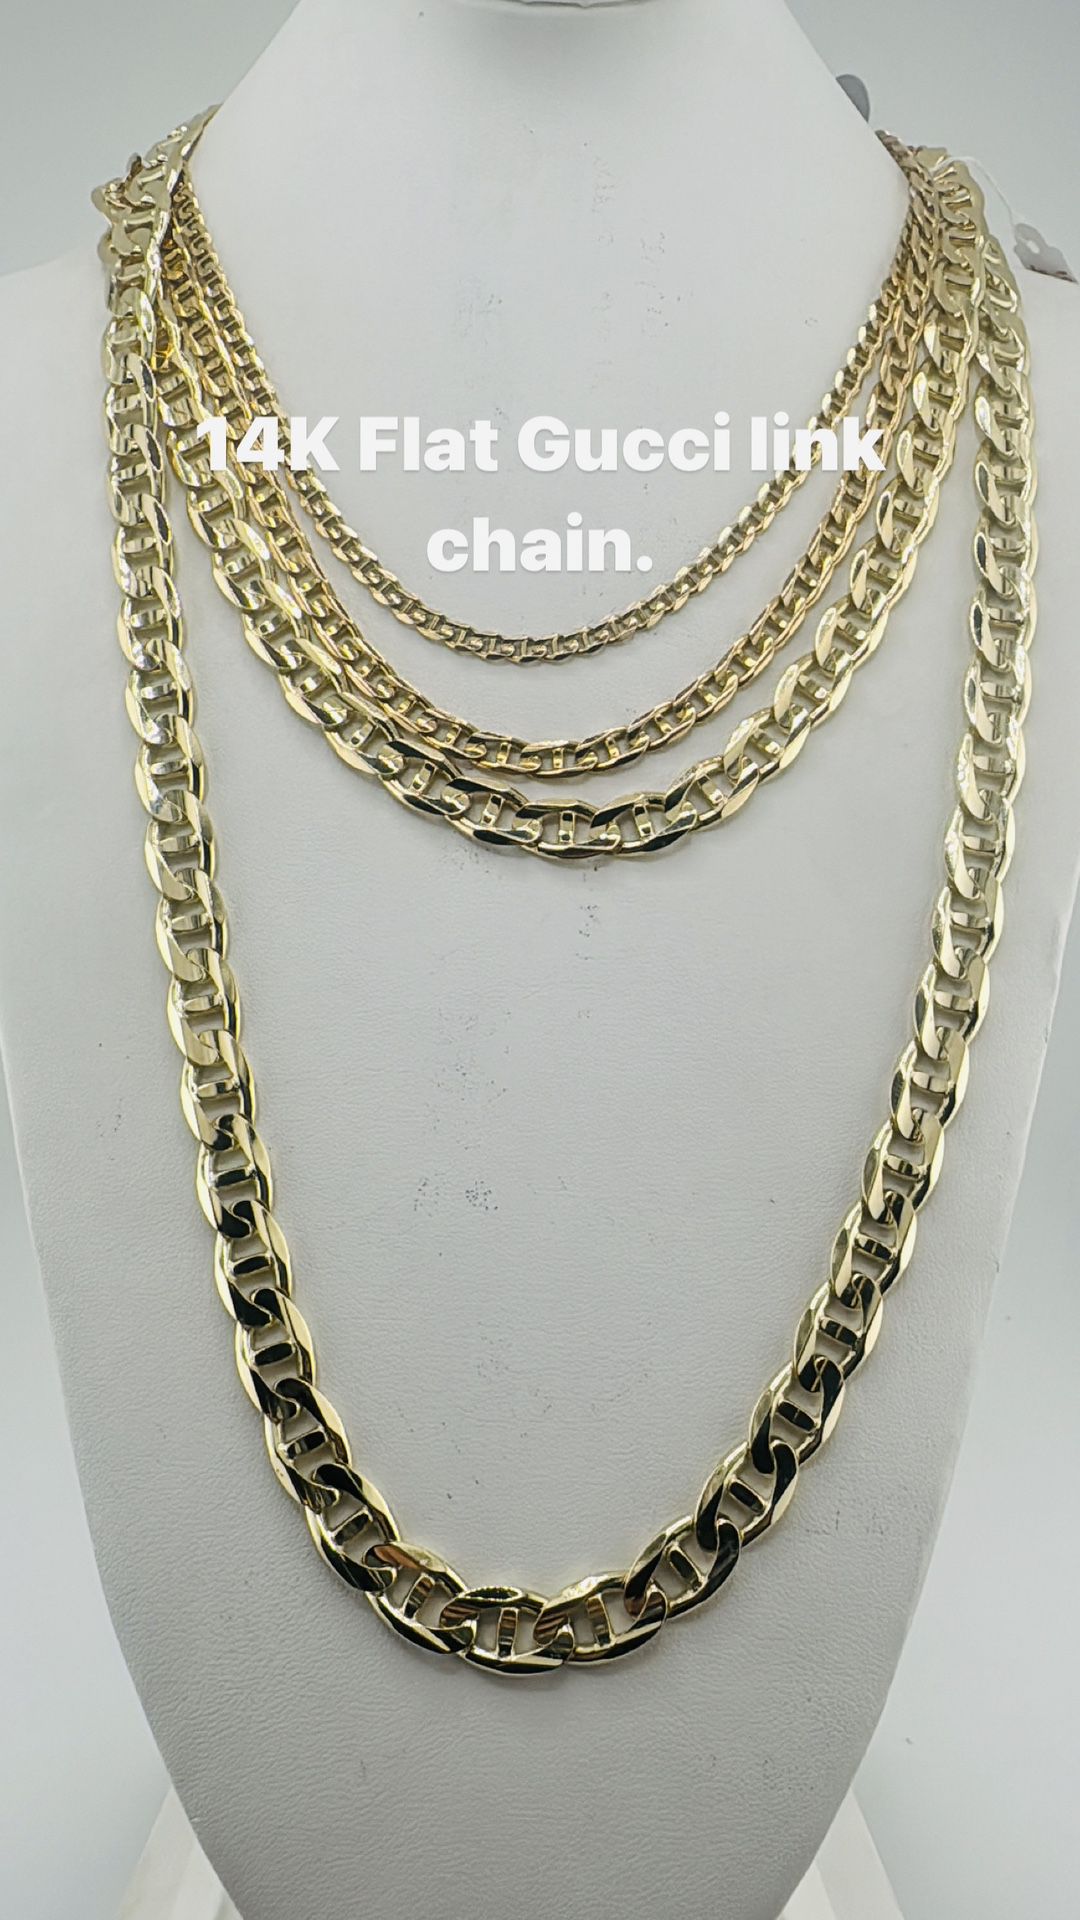 14K 💯 flat Gucci link chain. brand new, in stock.